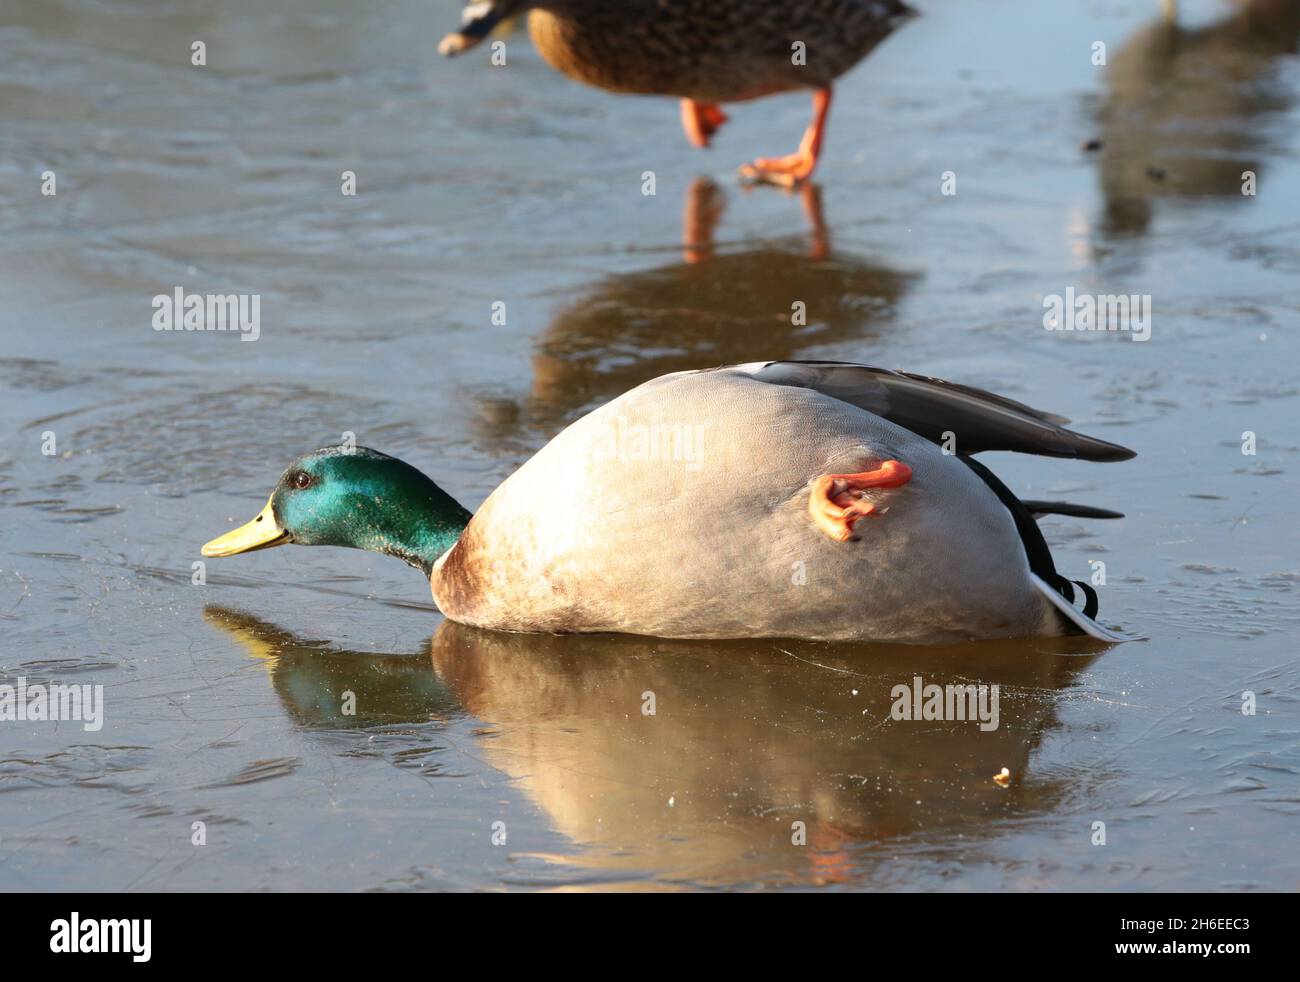 A duck slides on a icy pond in East London. Stock Photo